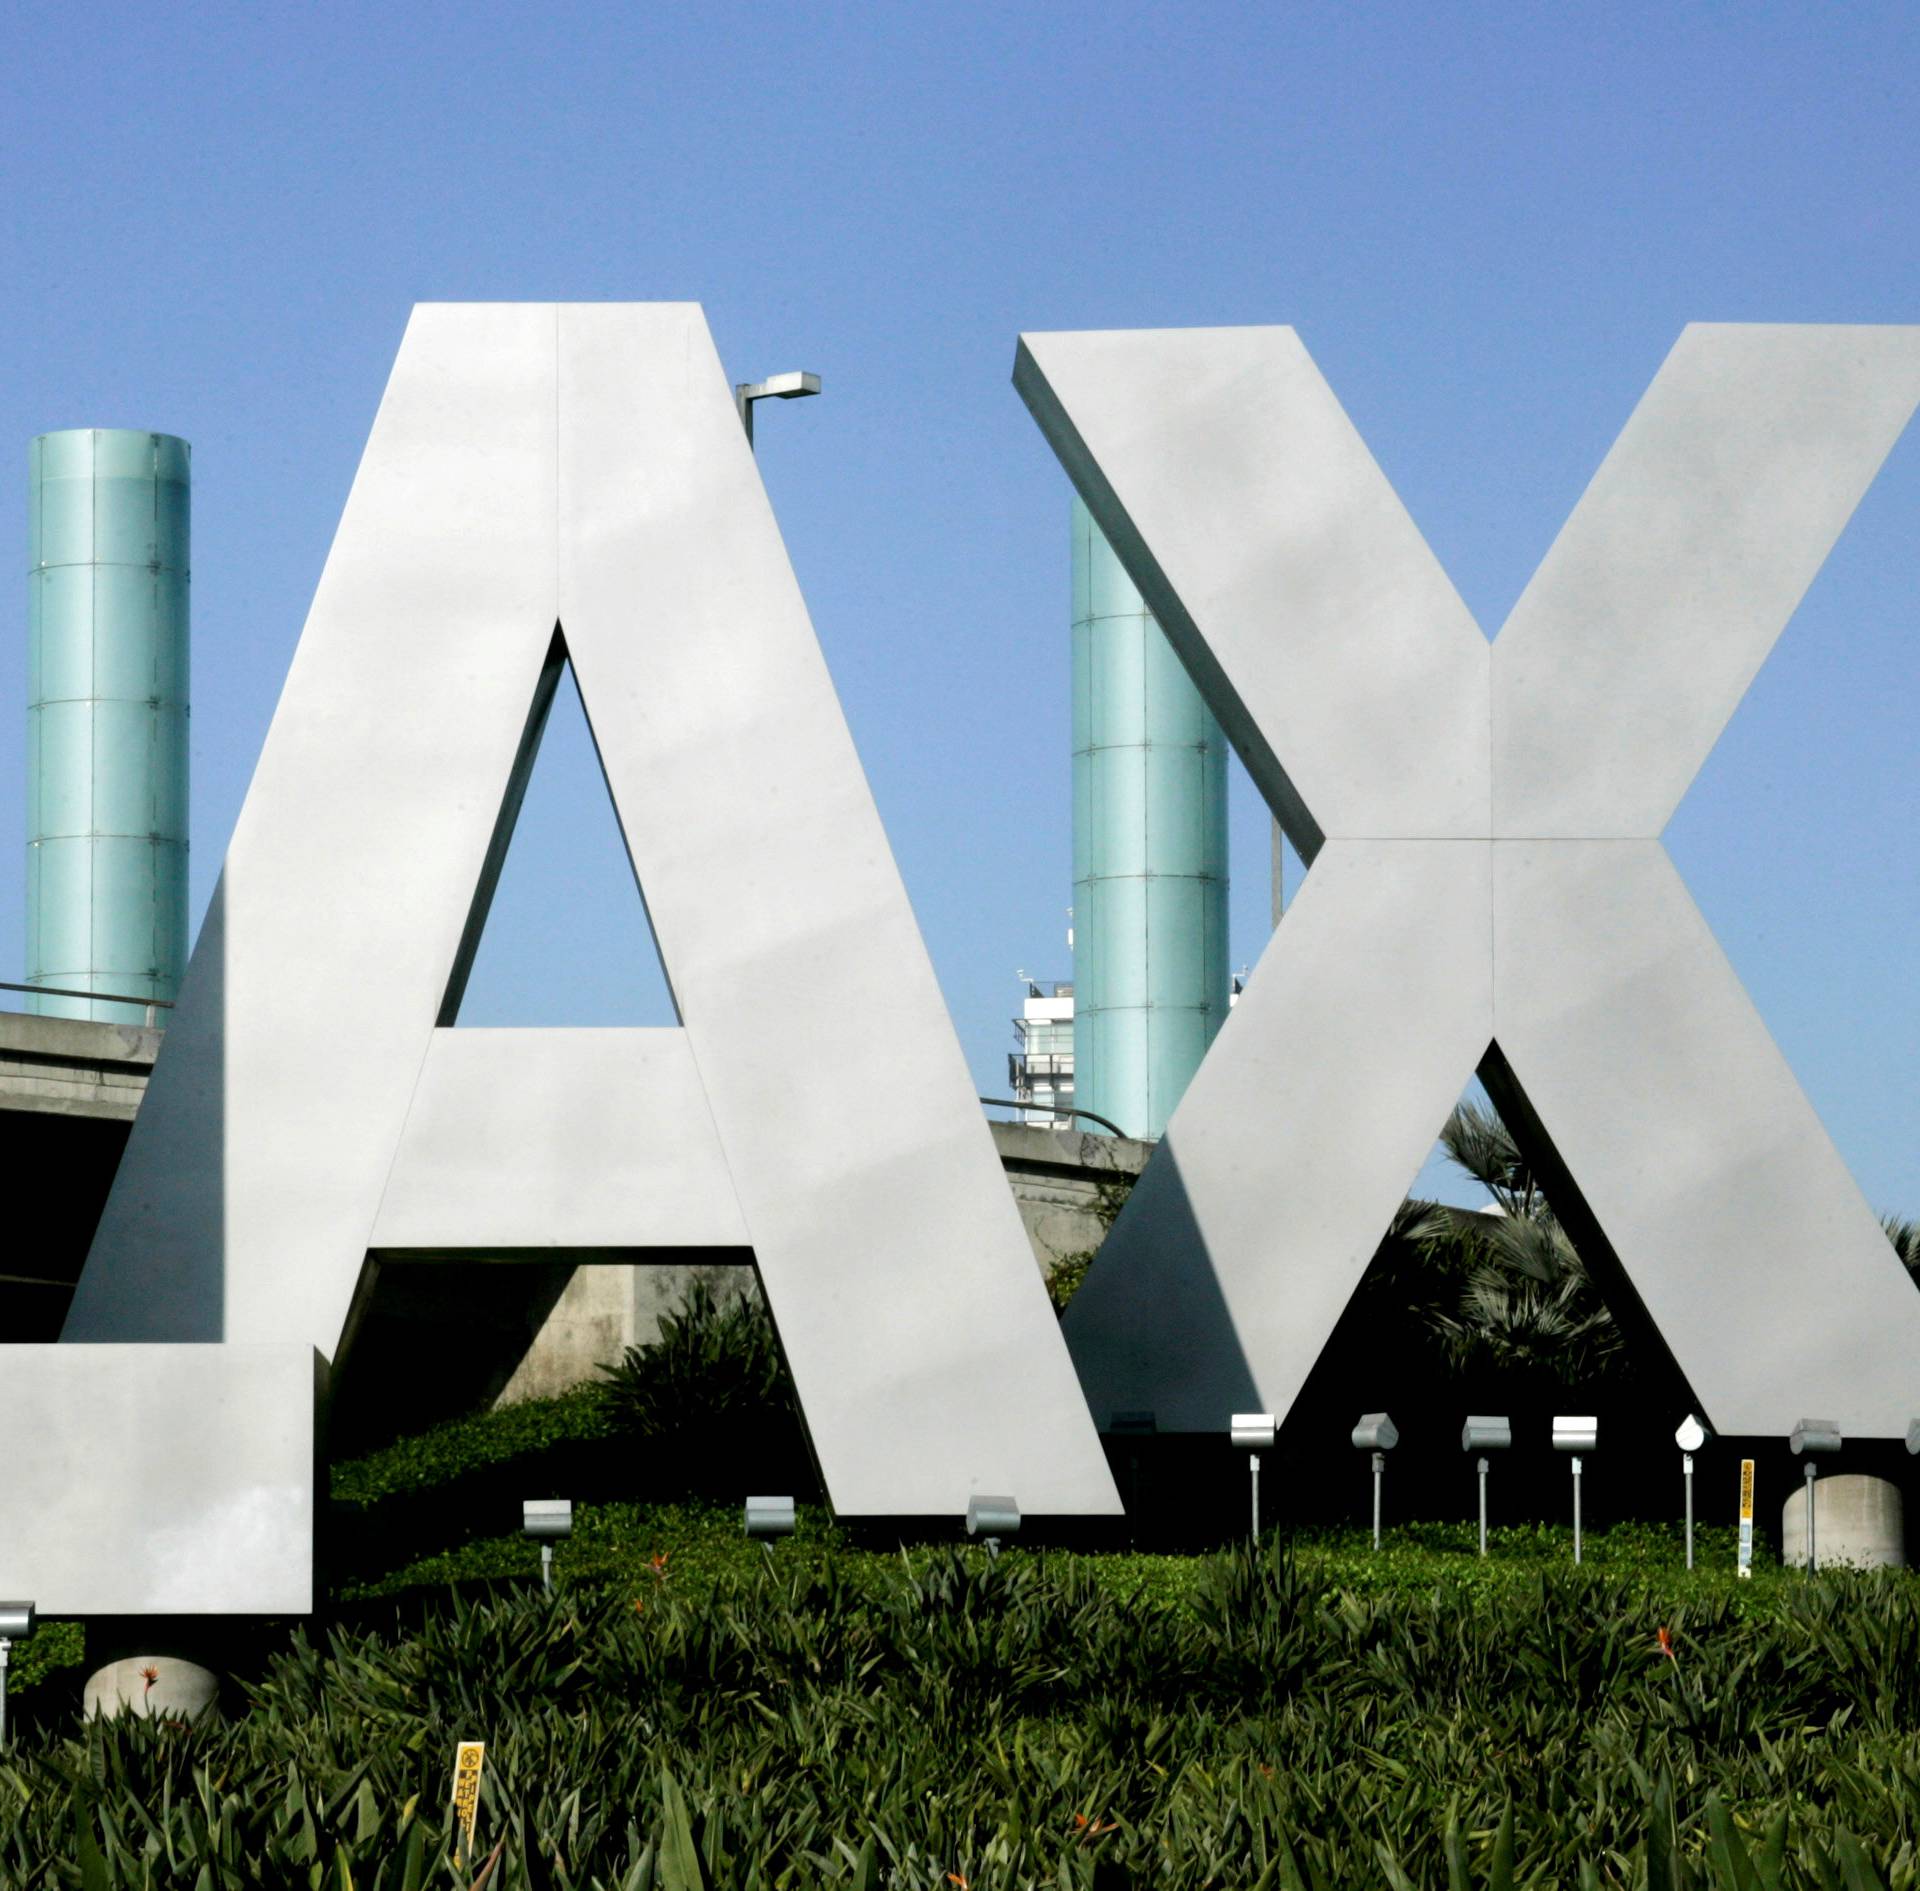 Giant stainless steel letters forming LAX are shown at the entrance way to Los Angeles International